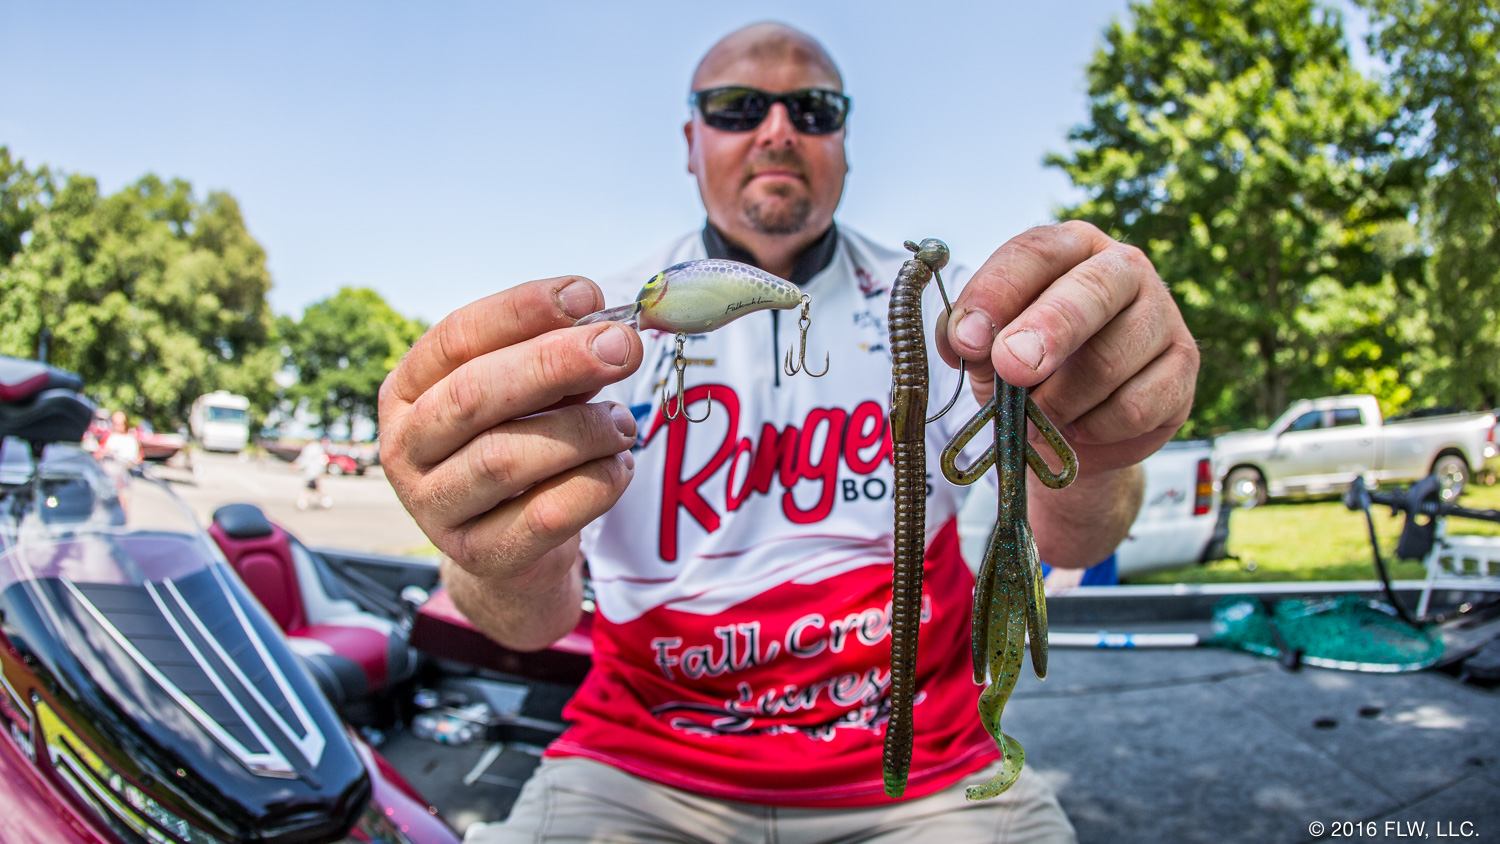 Jason Christie's Top 10 EARLY Fall Bass Fishing Lures